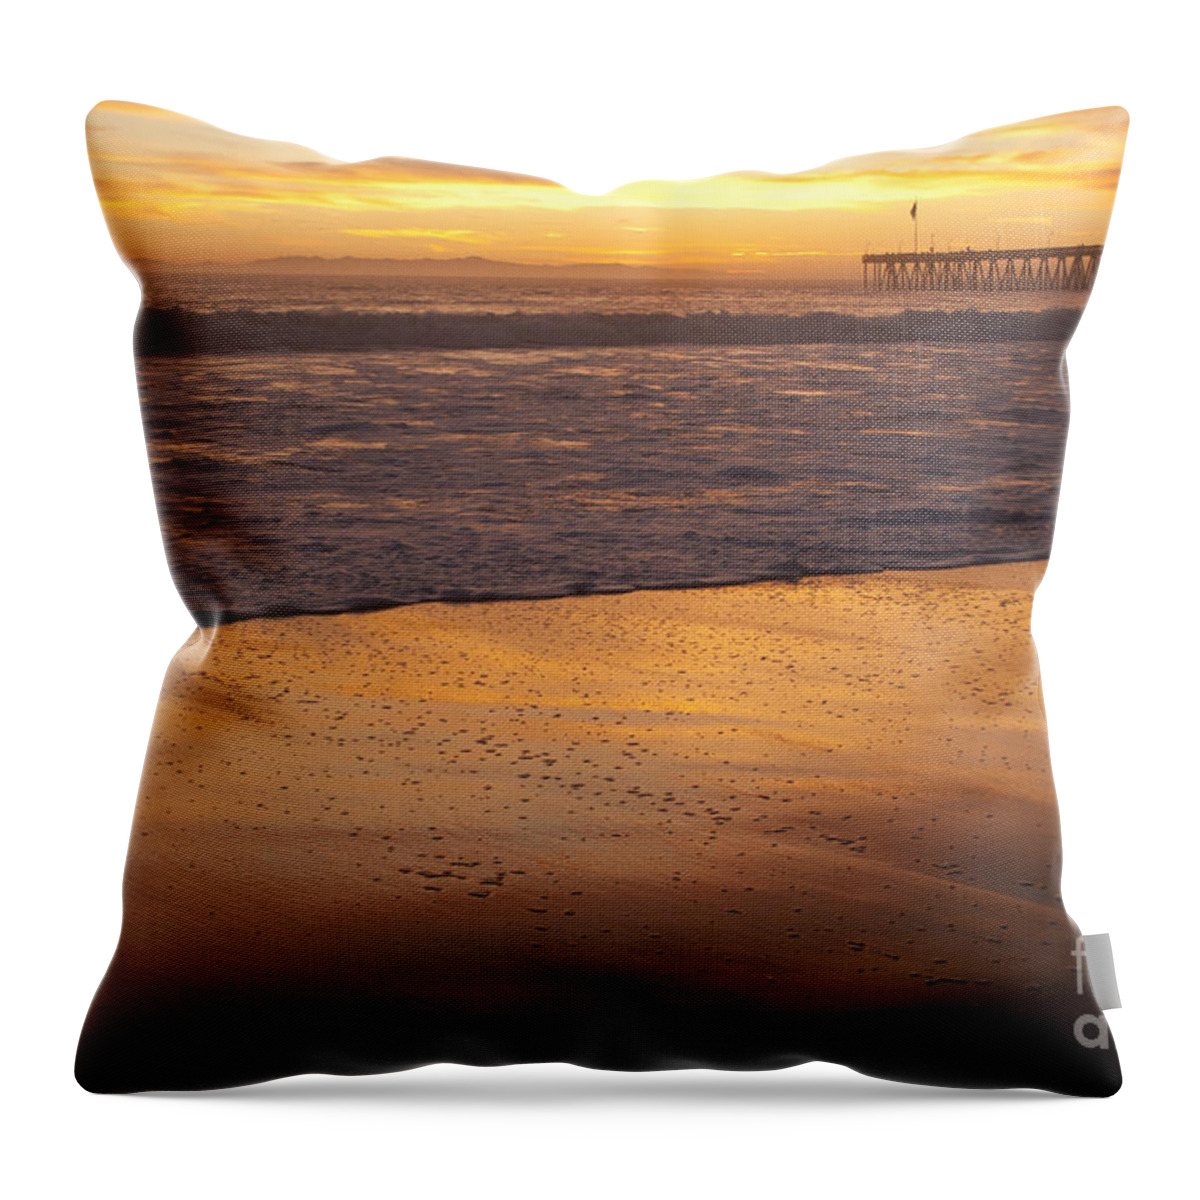 Ian Throw Pillow featuring the photograph Bubbles on the Sand with Ventura Pier by Ian Donley